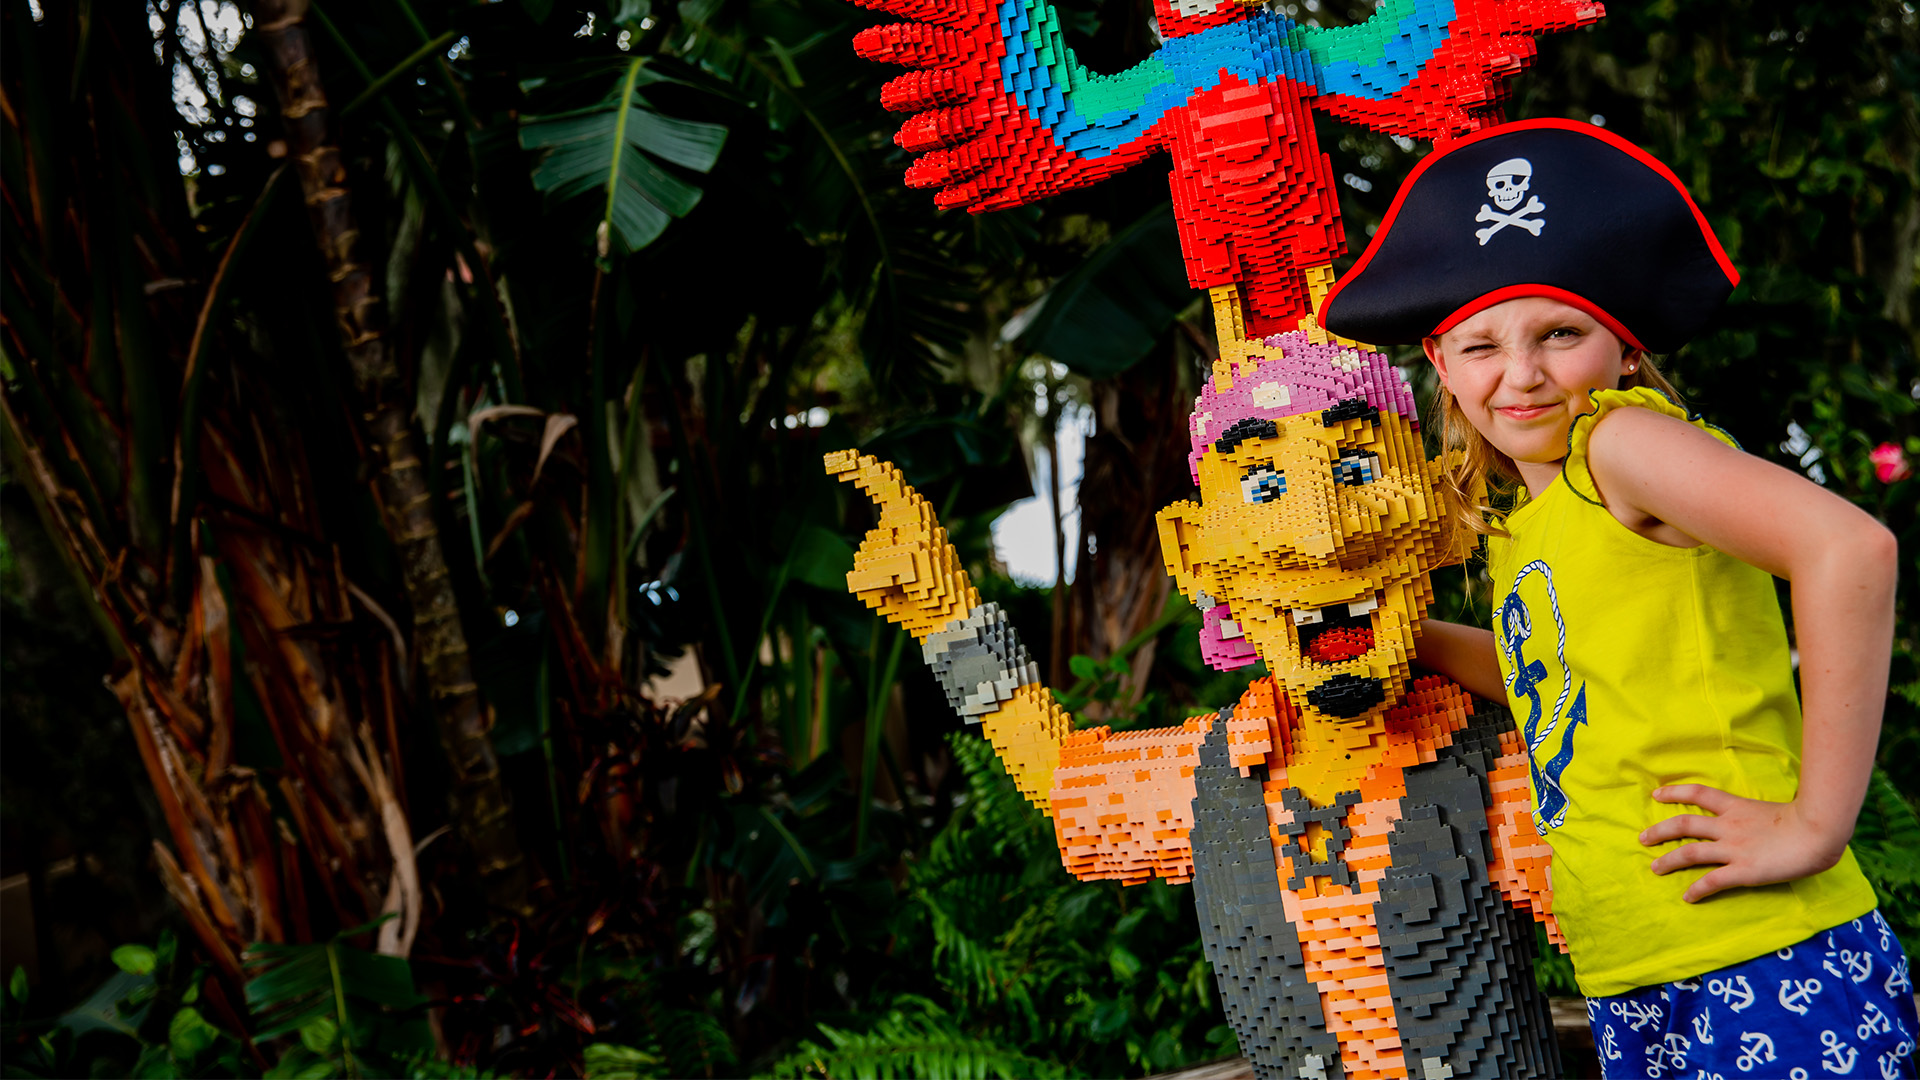 Join the pirate invasion at LEGOLAND Florida's Pirate Fest Weekends Event